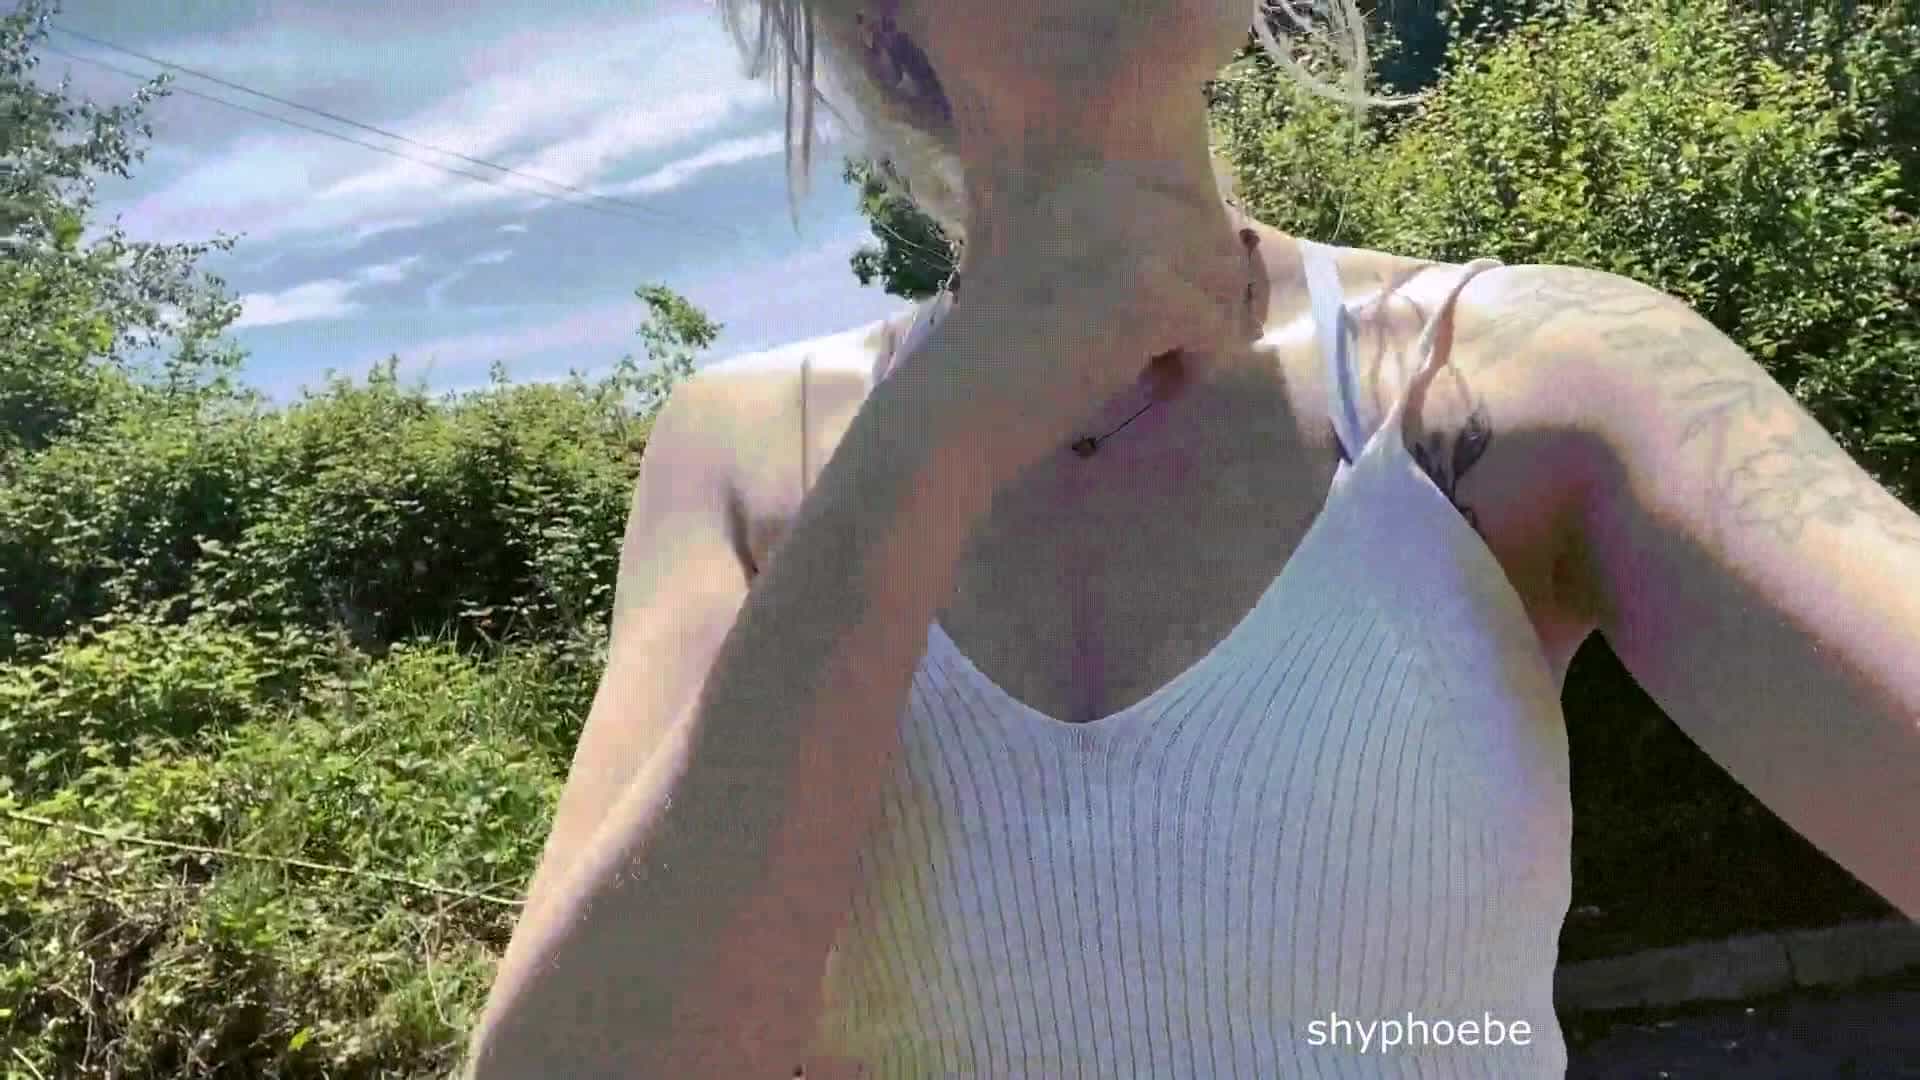 What would you do if you saw me flashing on your hike?